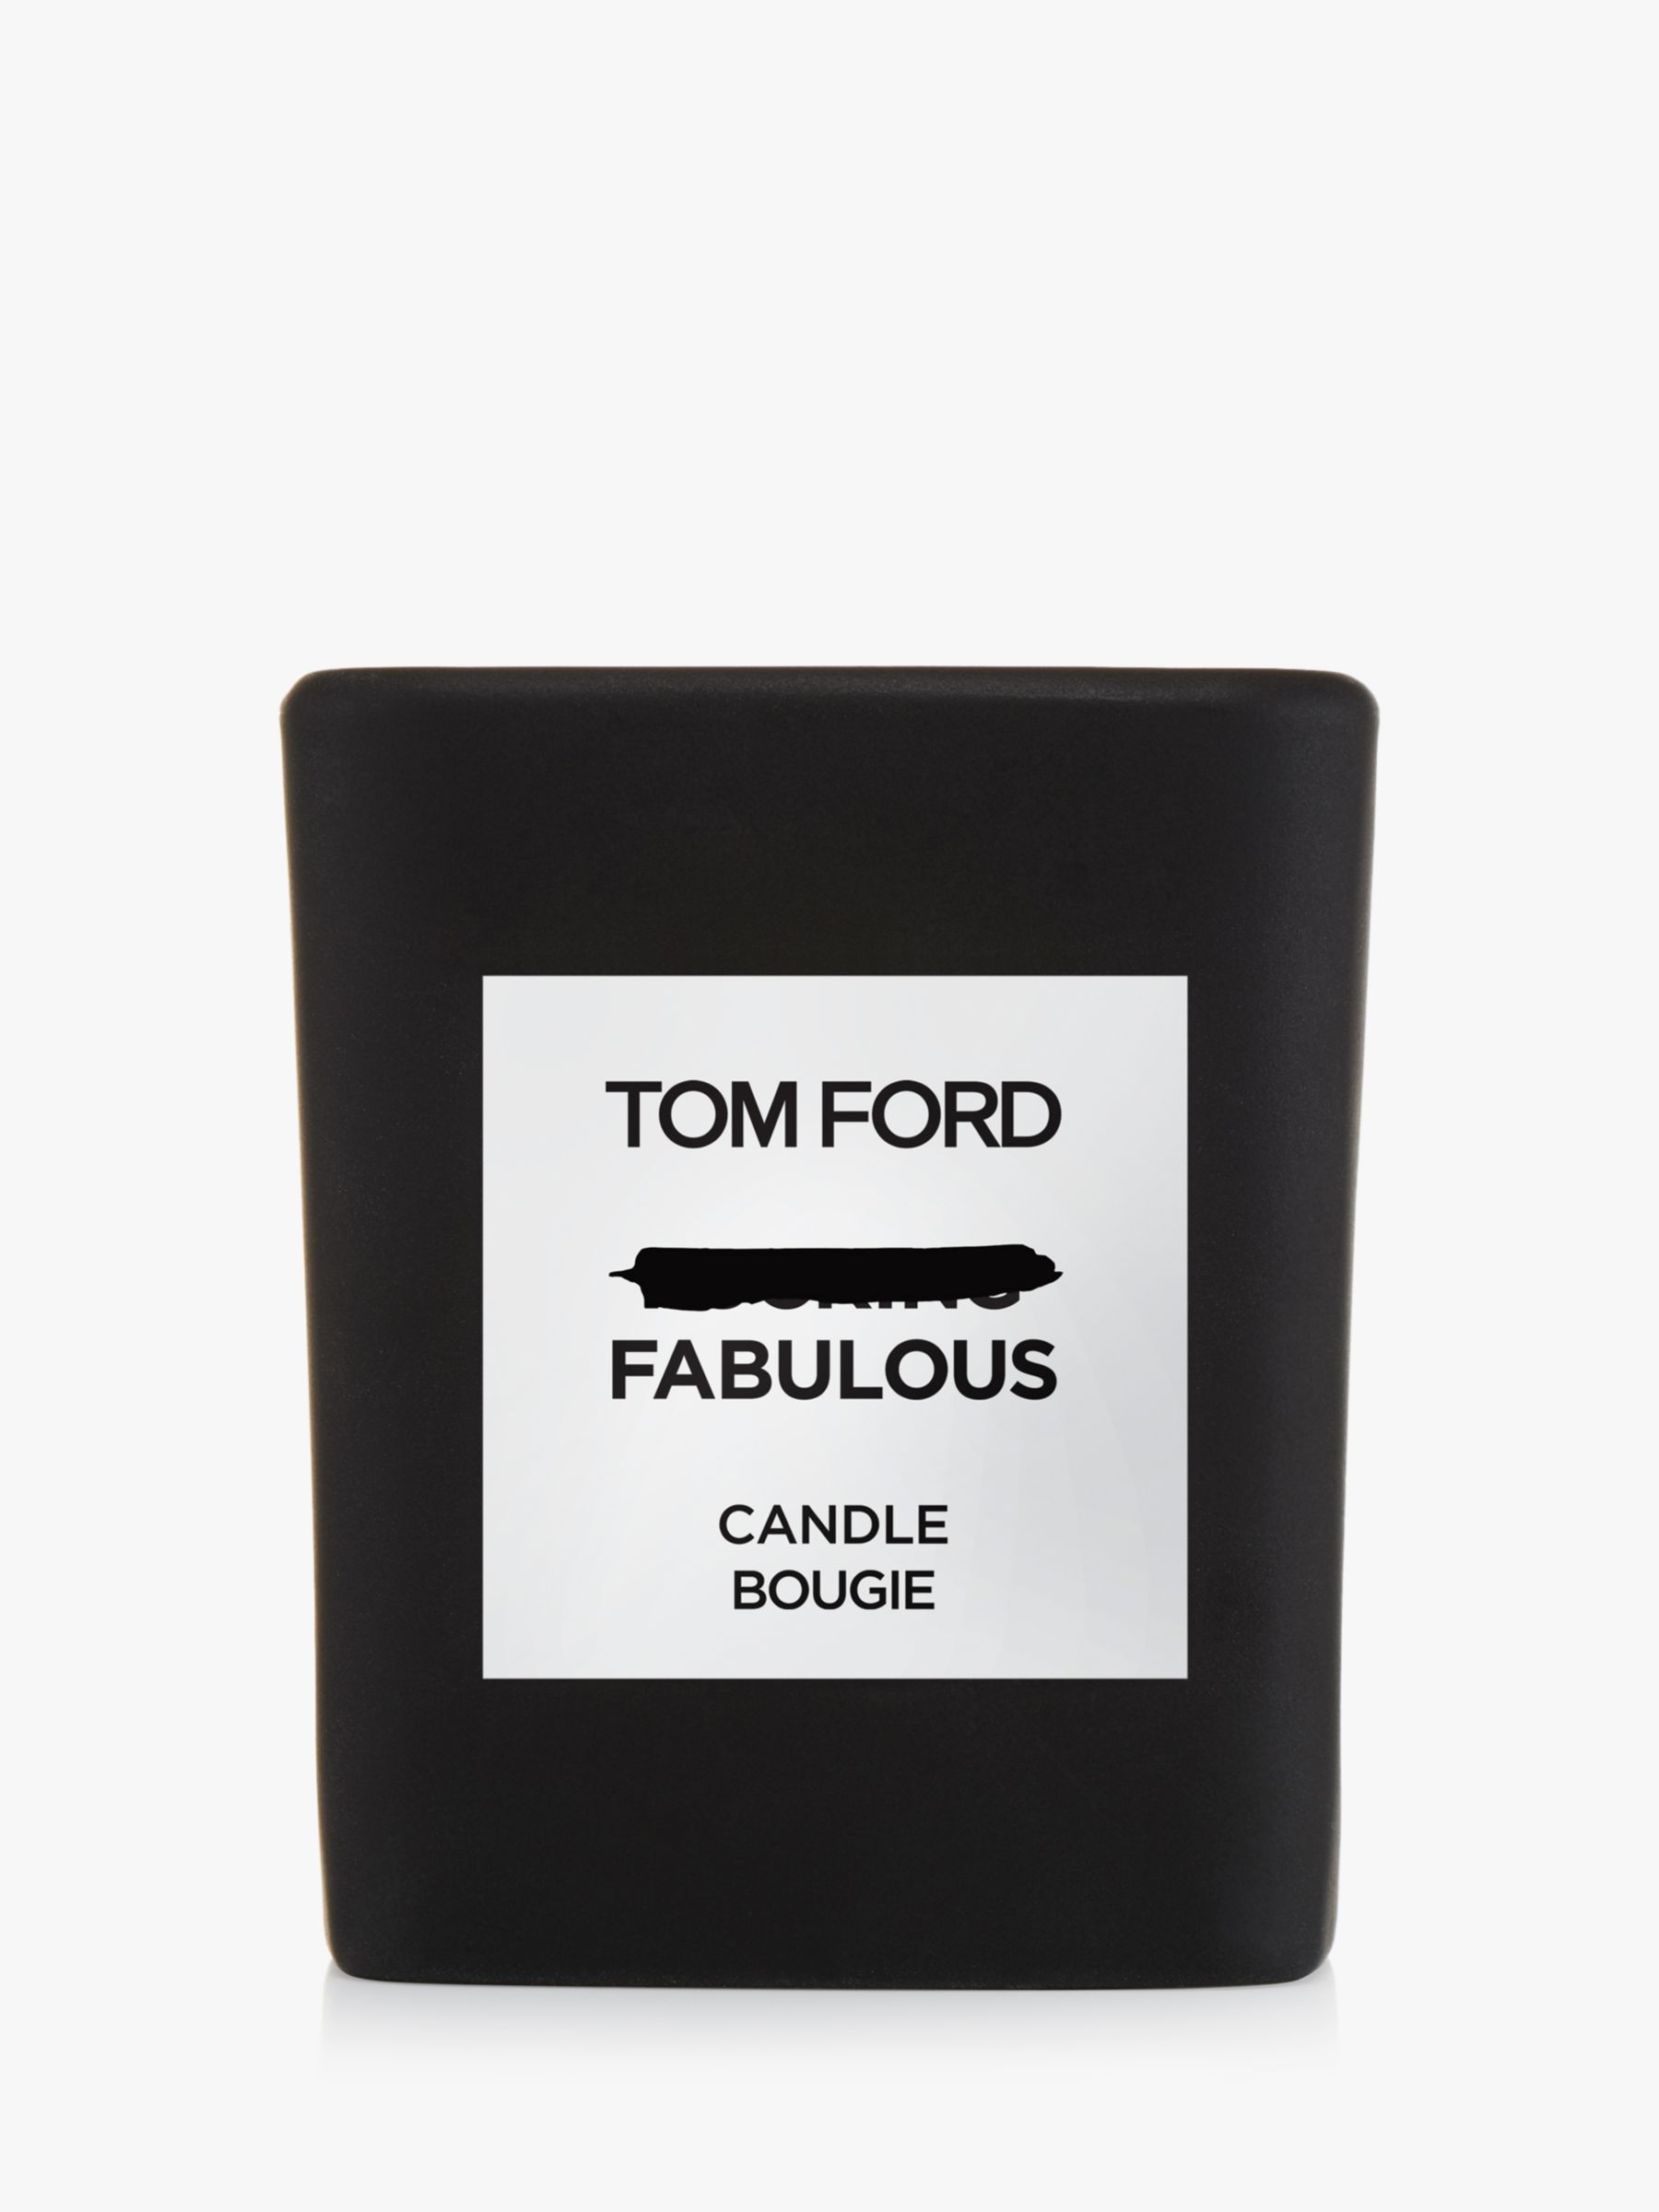 TOM FORD Private Blend Fabulous Candle, 200g at John Lewis & Partners